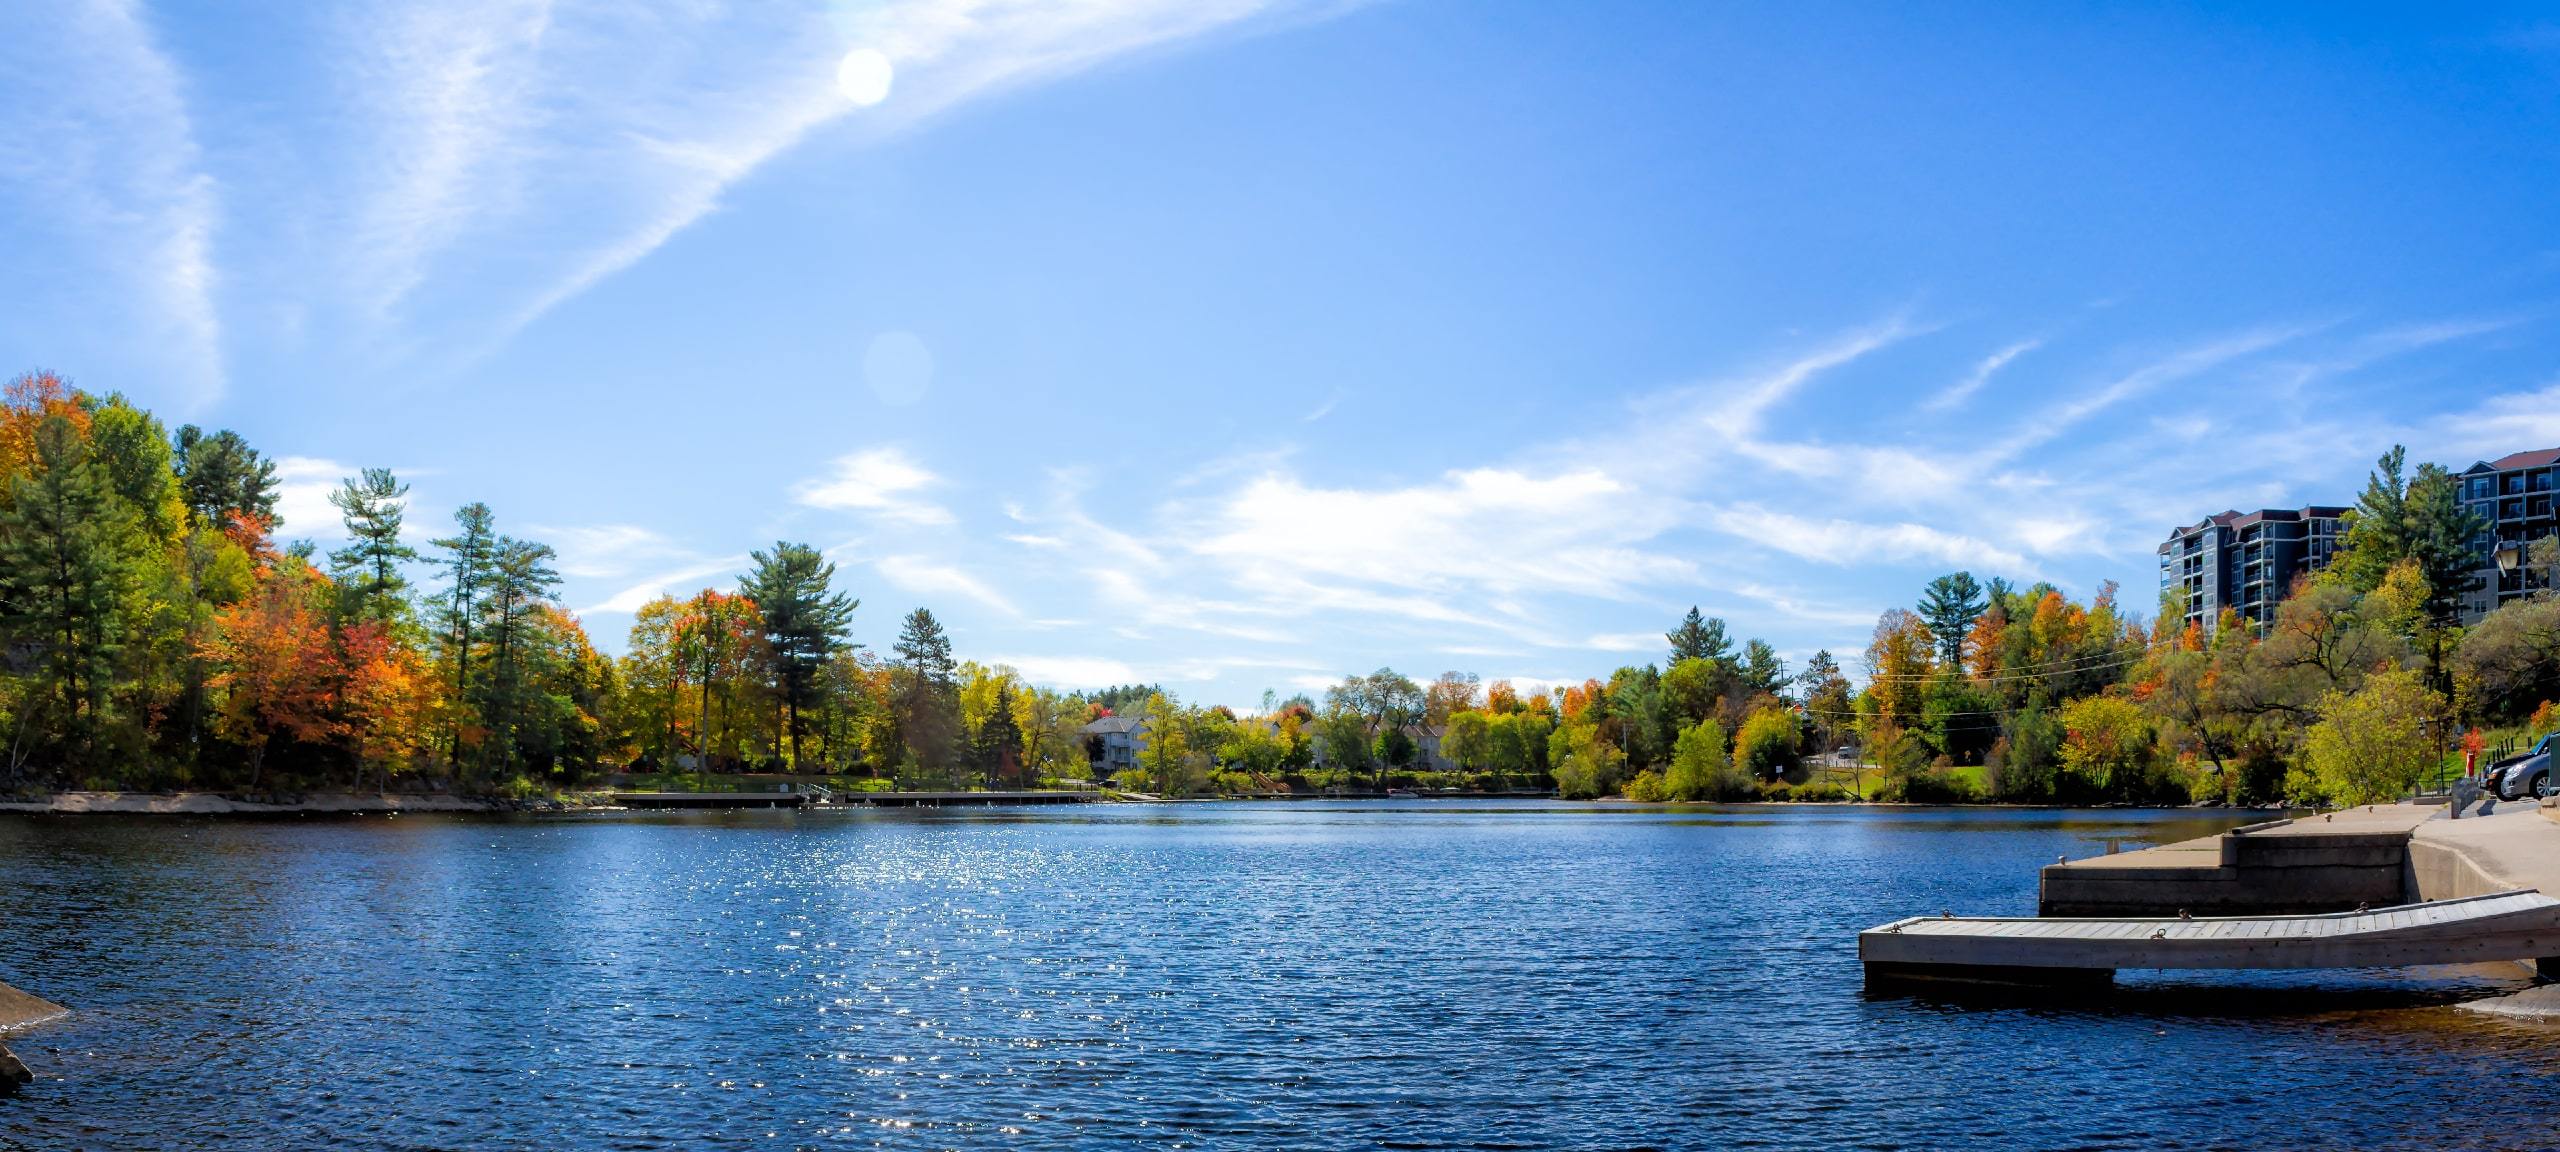 View of lake, trees, and condos on waterfront in Bracebridge, ON